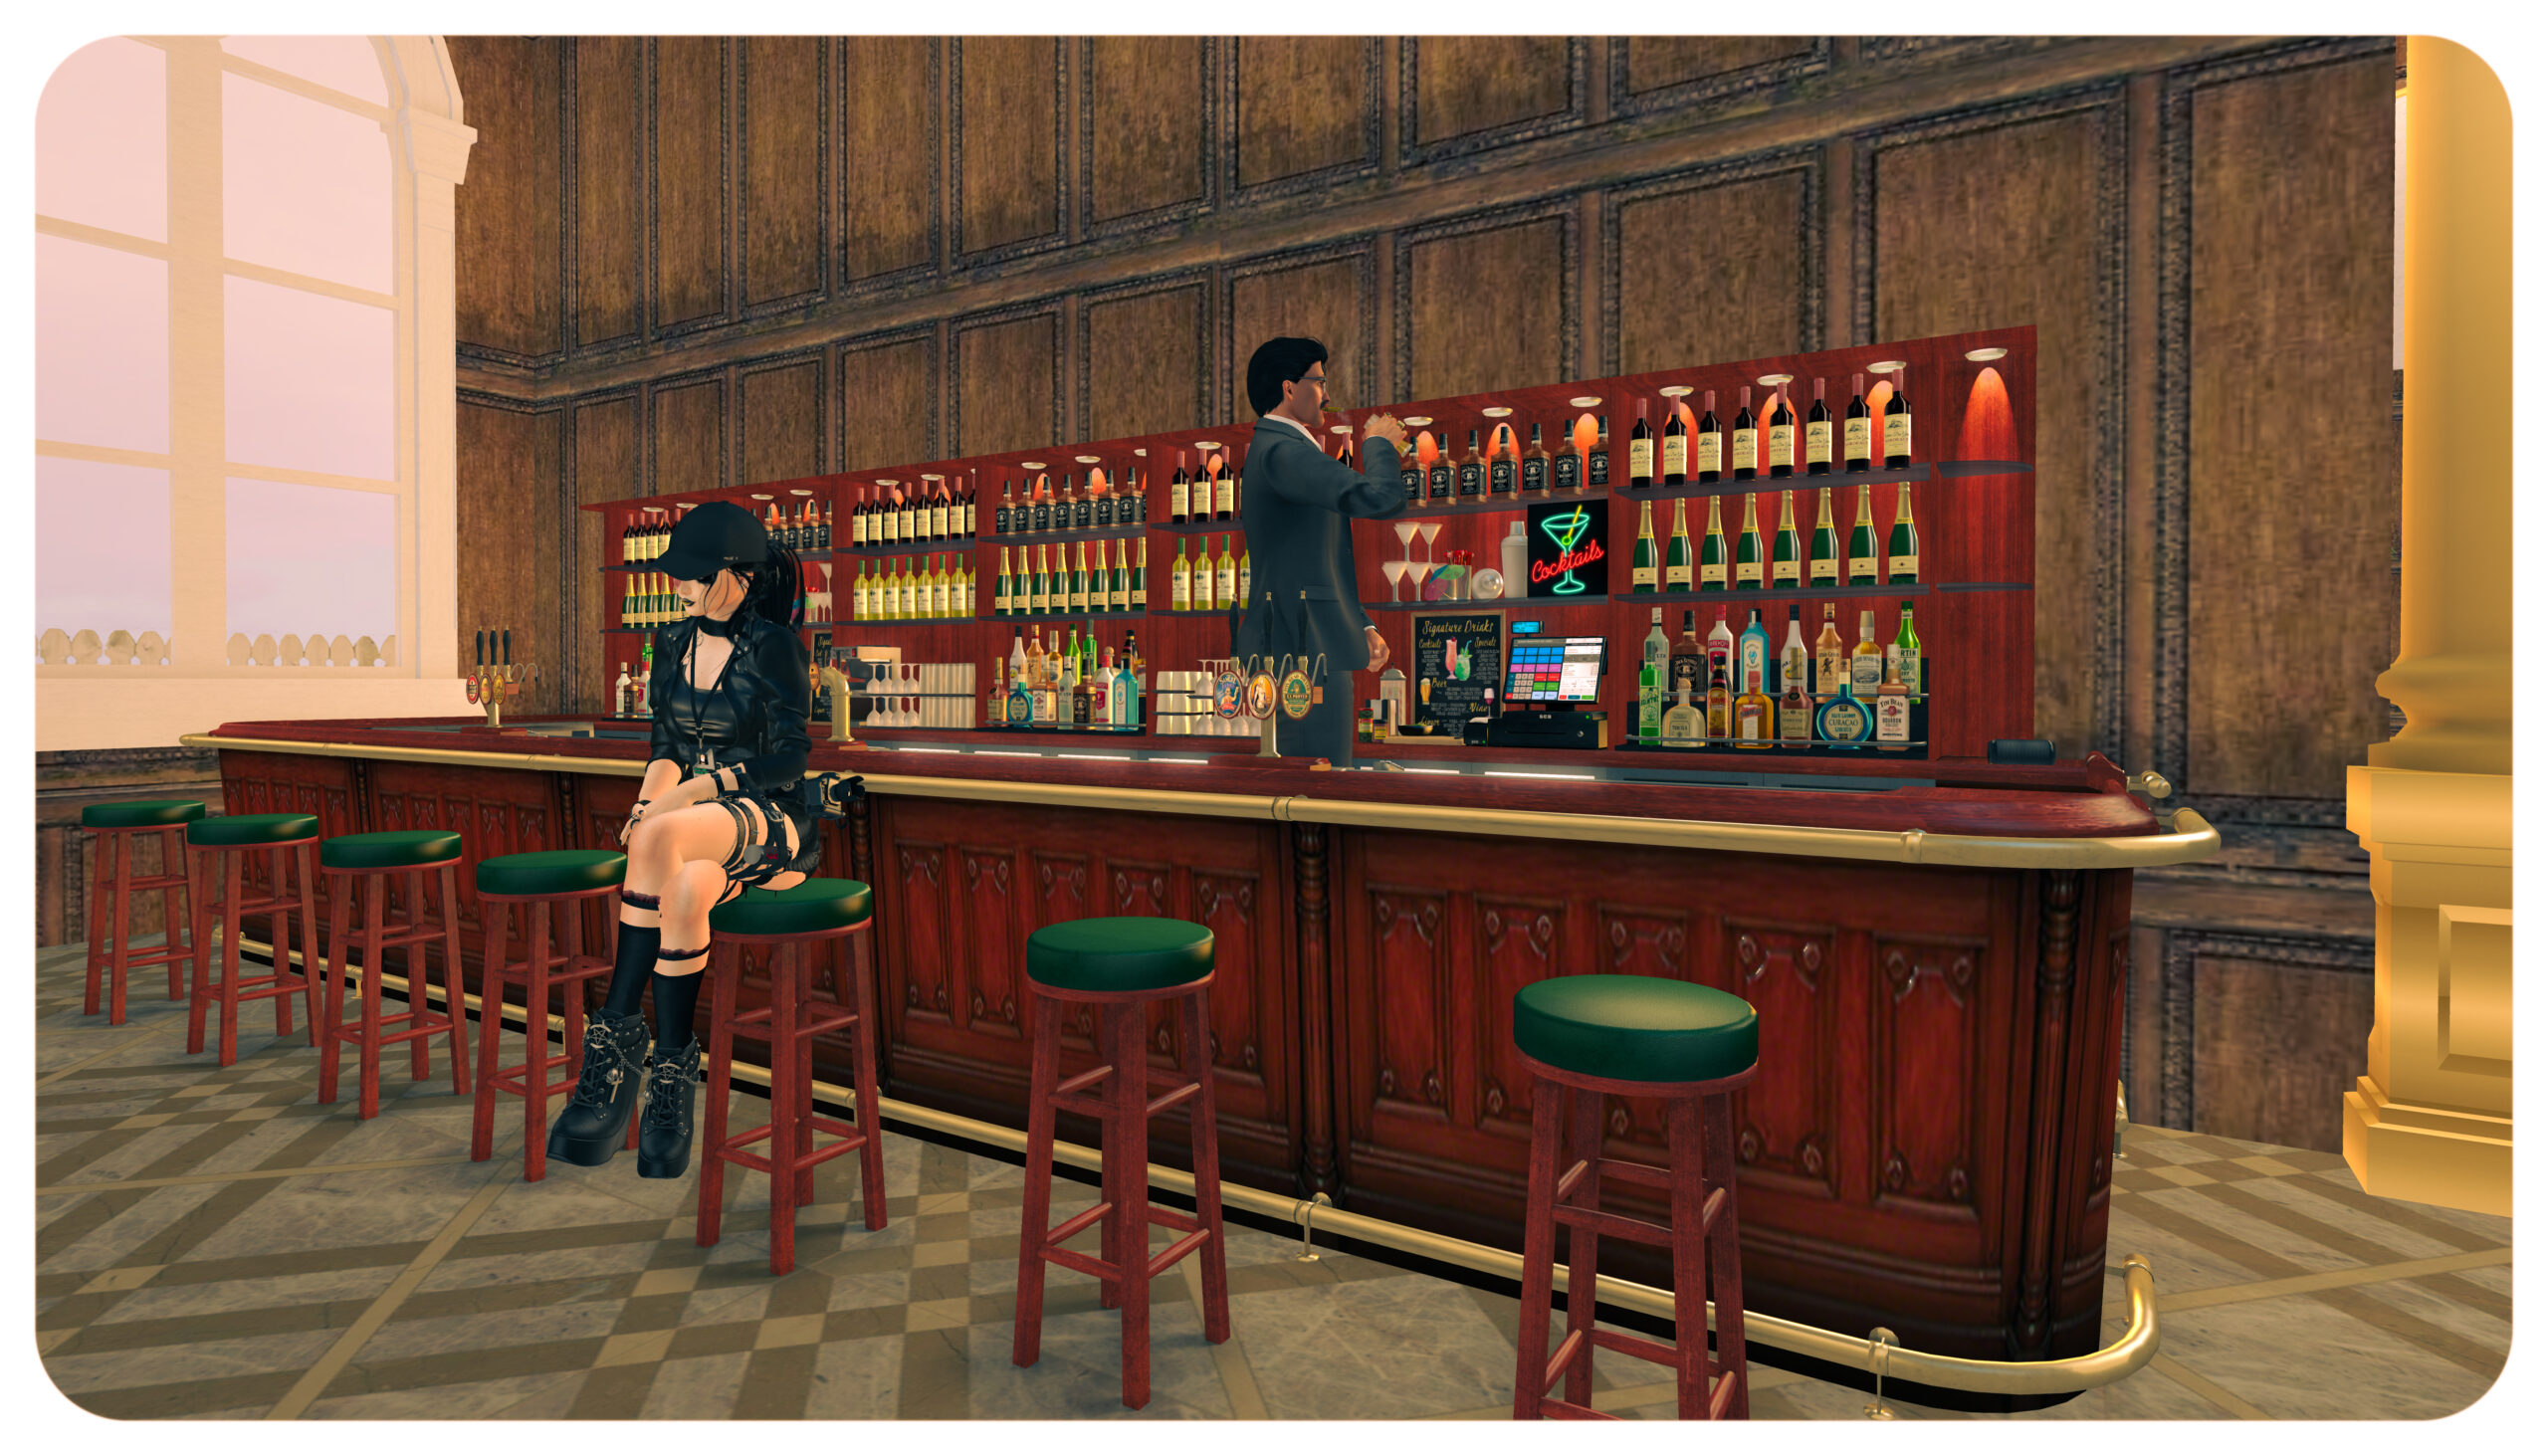 The bar with Anthony behind it, Daiyu at the front. It's a long bar, wood with many stools and lots of drinks behind it.